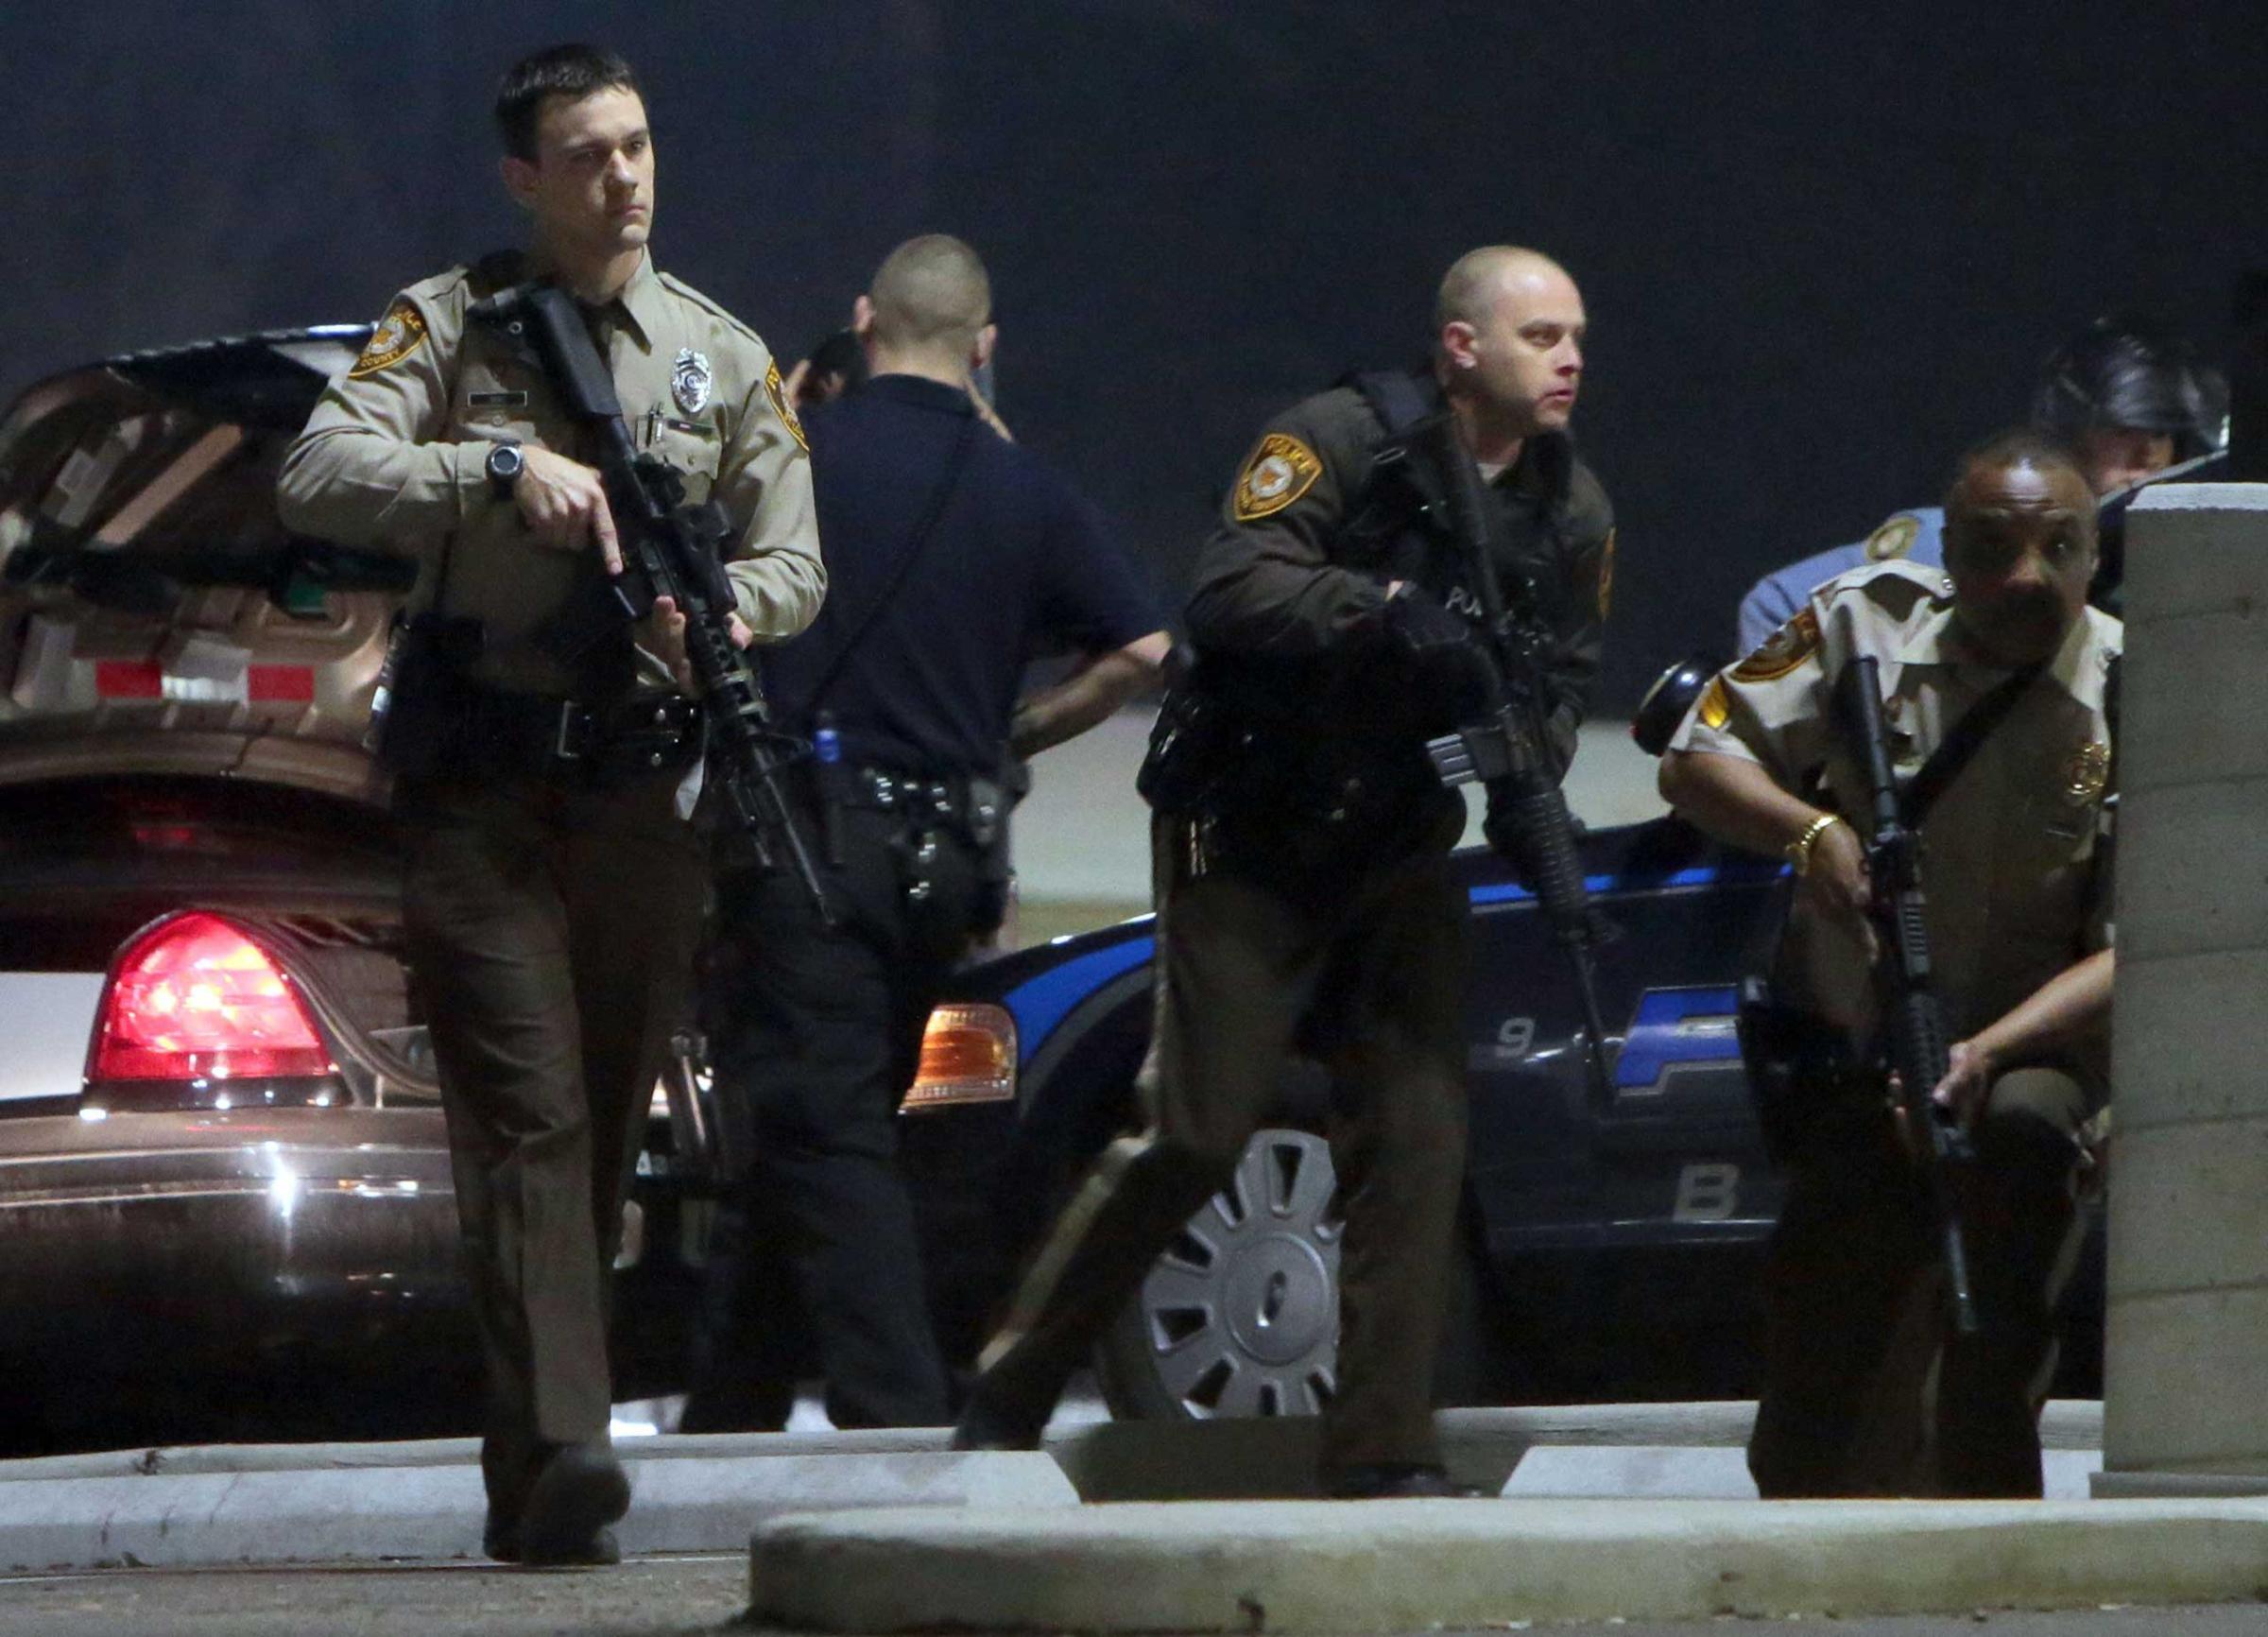 Police mobilize in the parking lot of the Ferguson Police Station after two police officers were shot while standing guard in front of the Ferguson Police Station, March 12, 2015.